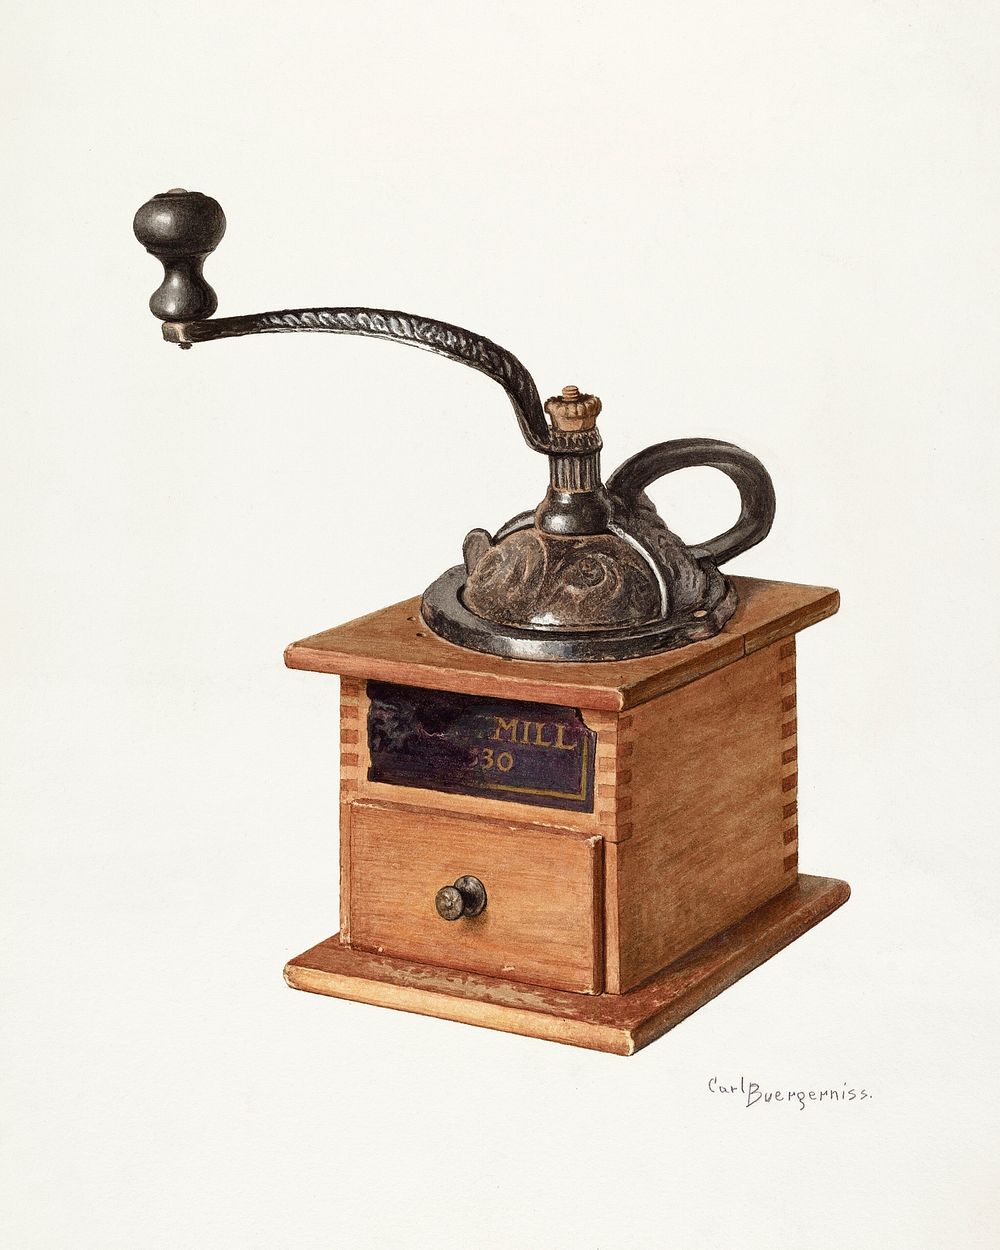 Coffee Mill (ca. 1940) by Carl Buergerniss. Original from The National Gallery of Art. Digitally enhanced by rawpixel.